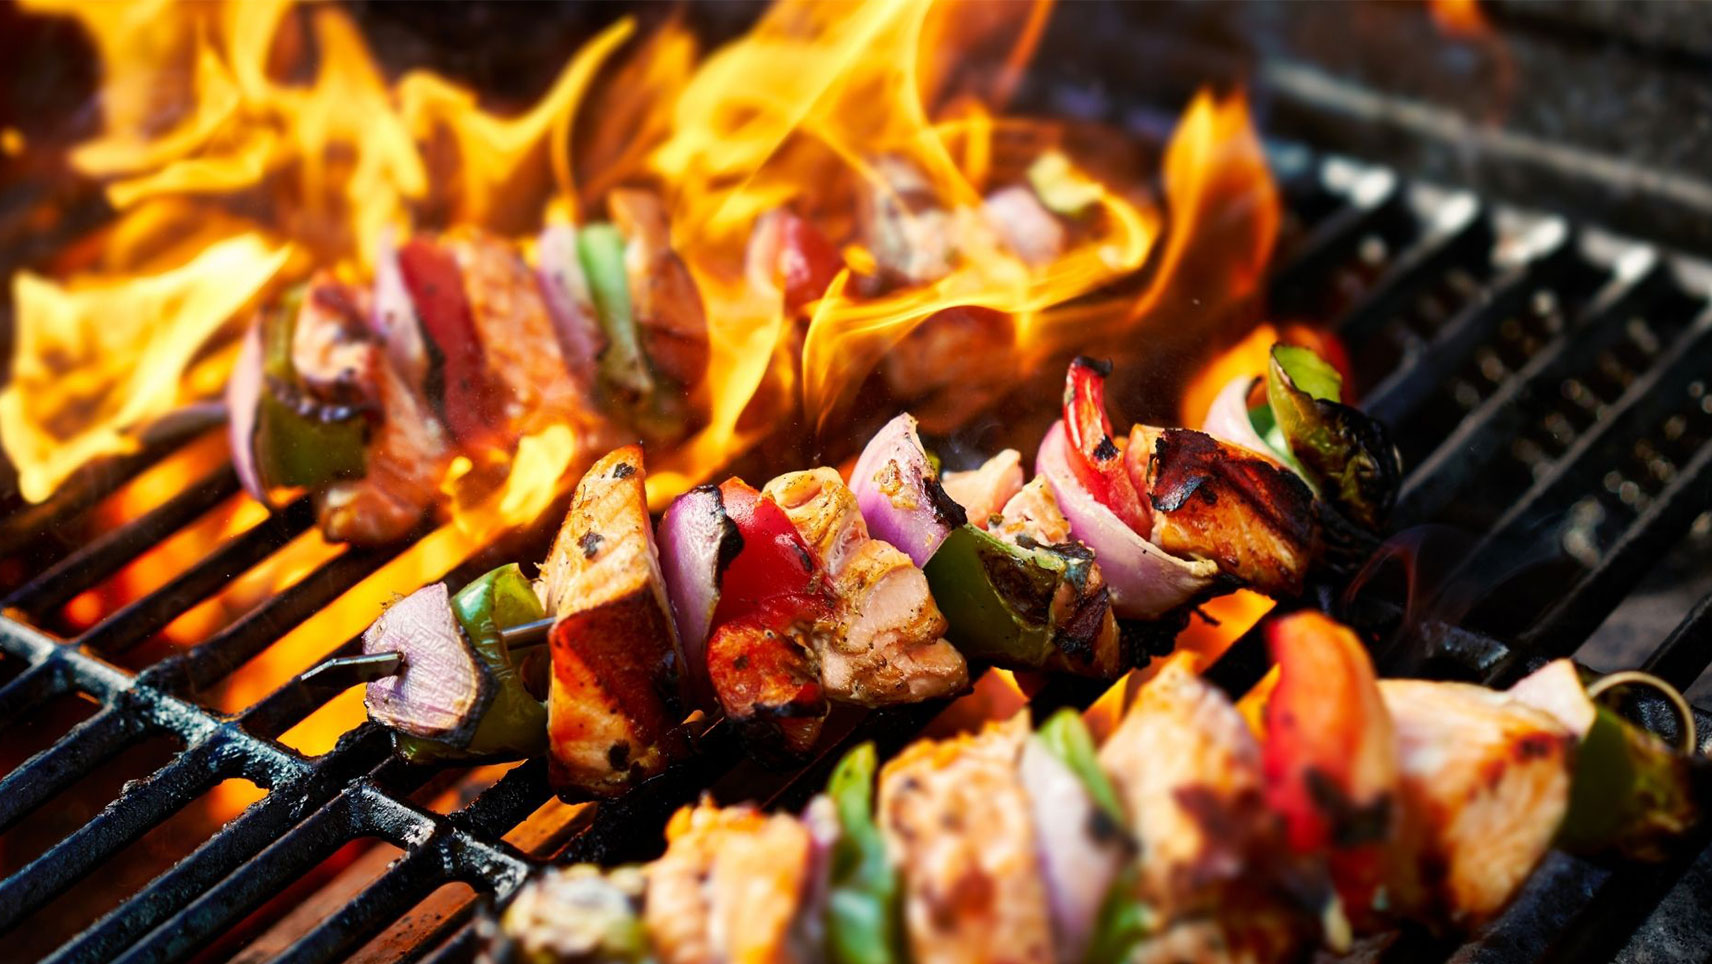 Chicken and Vegetables skewers on a charcoal grill